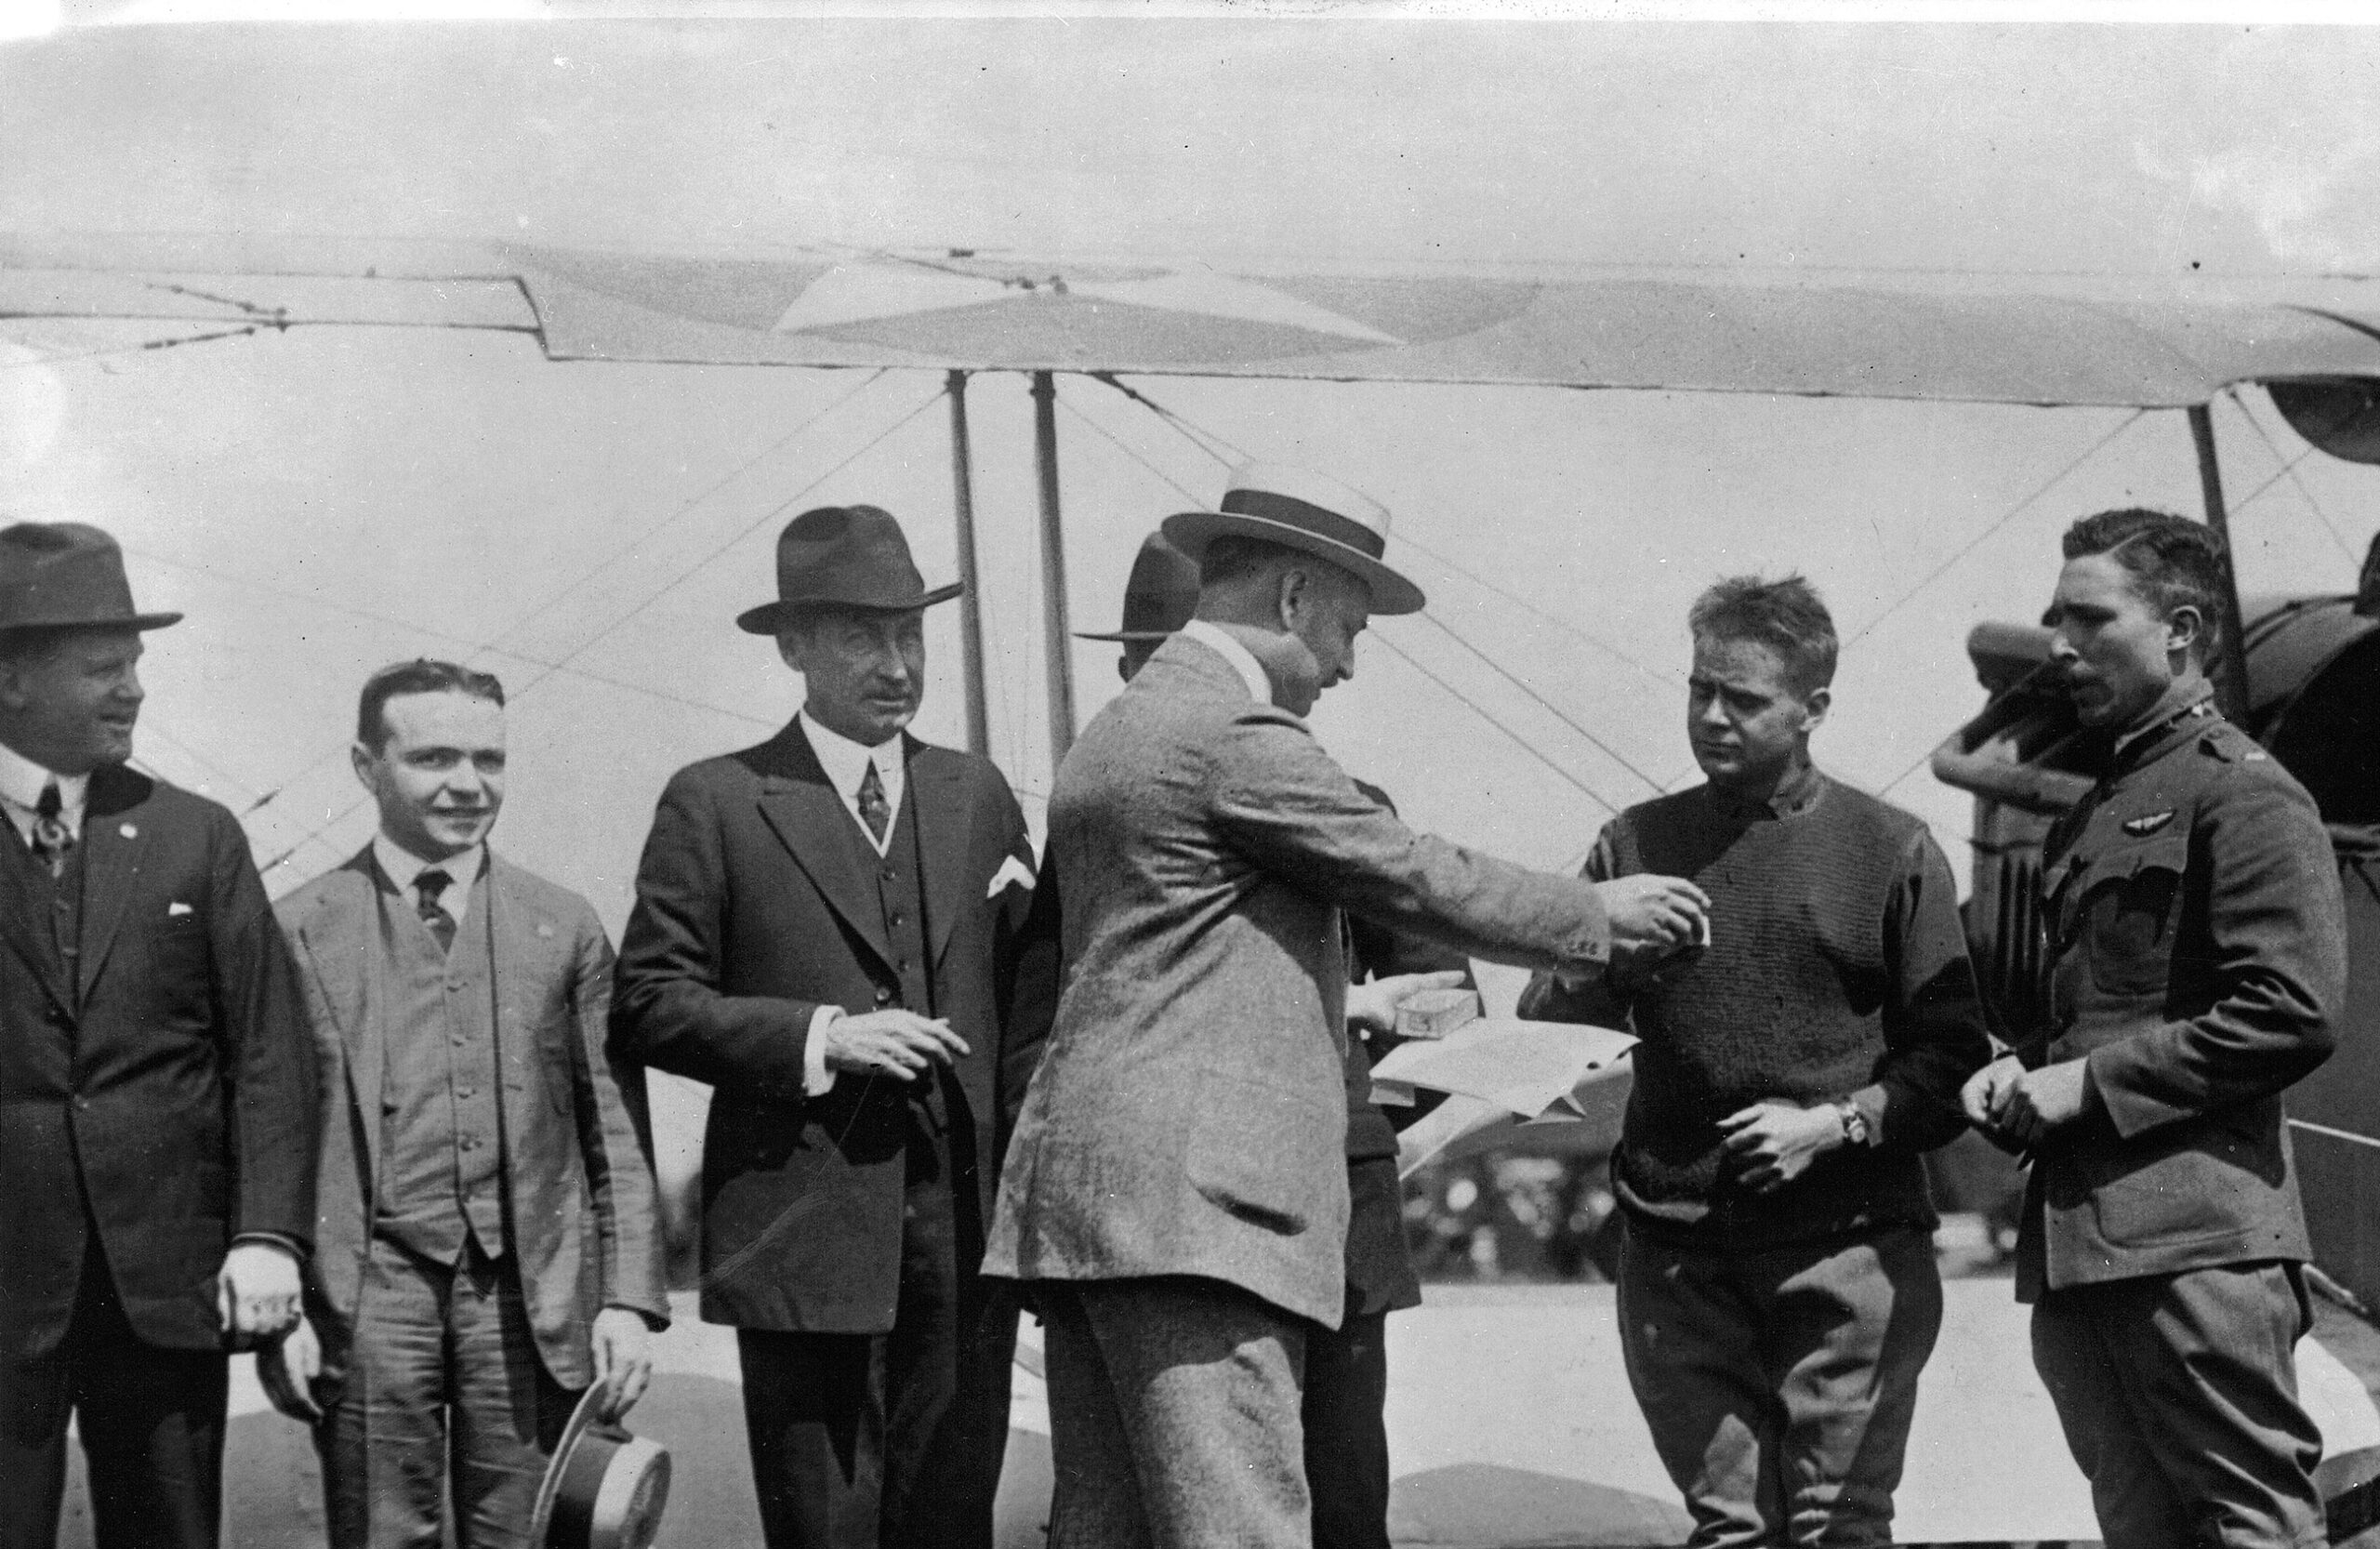 Air Force pilots receiving Hamilton watches on 15th of may 1918